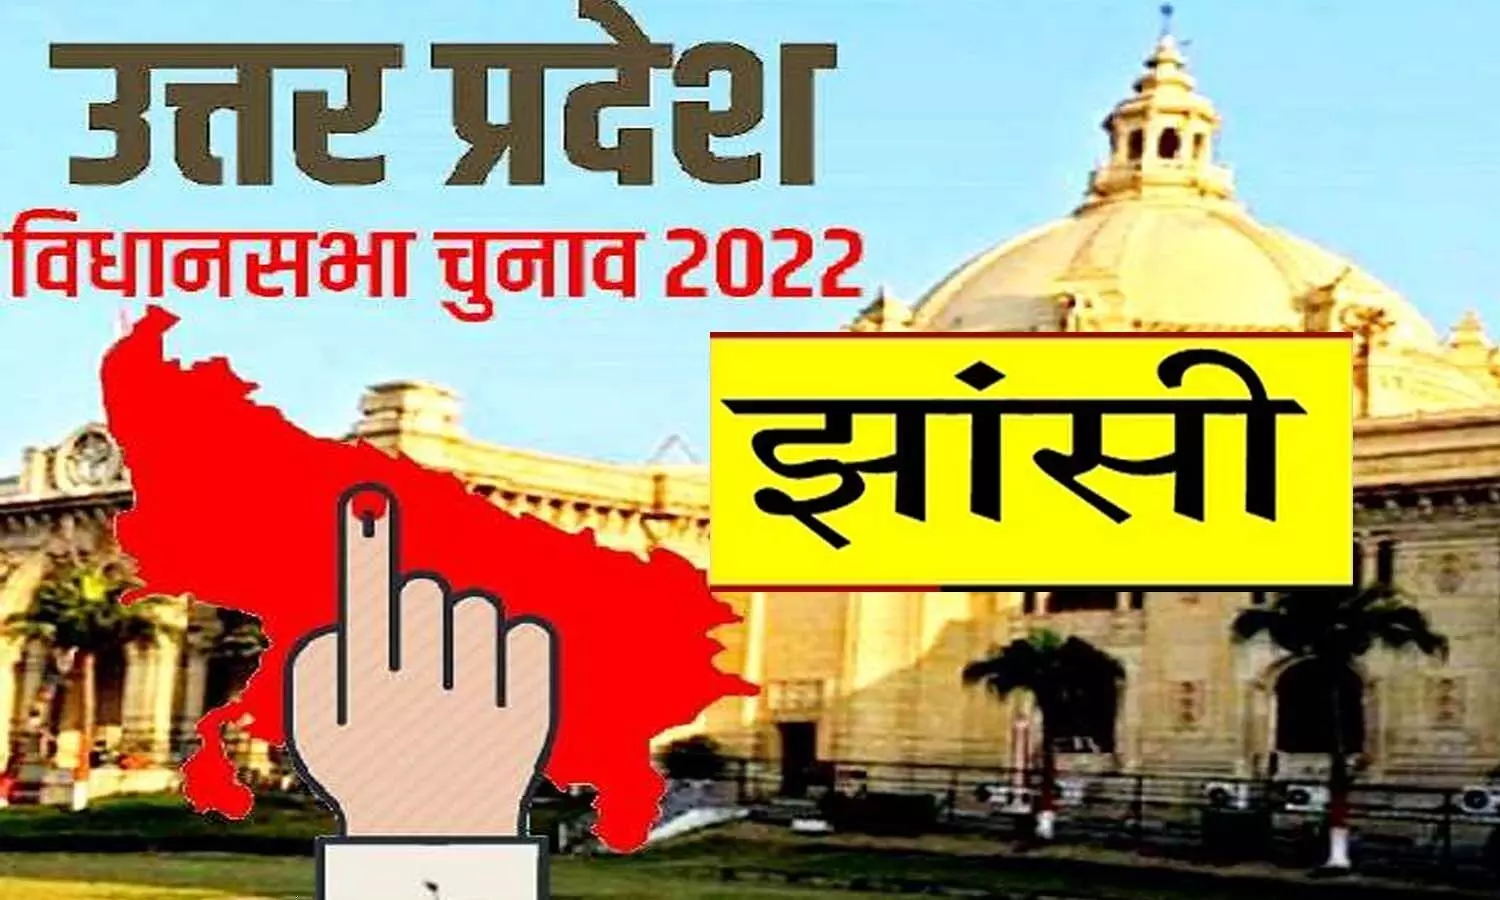 UP Election 2022: Political parties are betting on outsiders, they have become strangers, the candidate is facing opposition